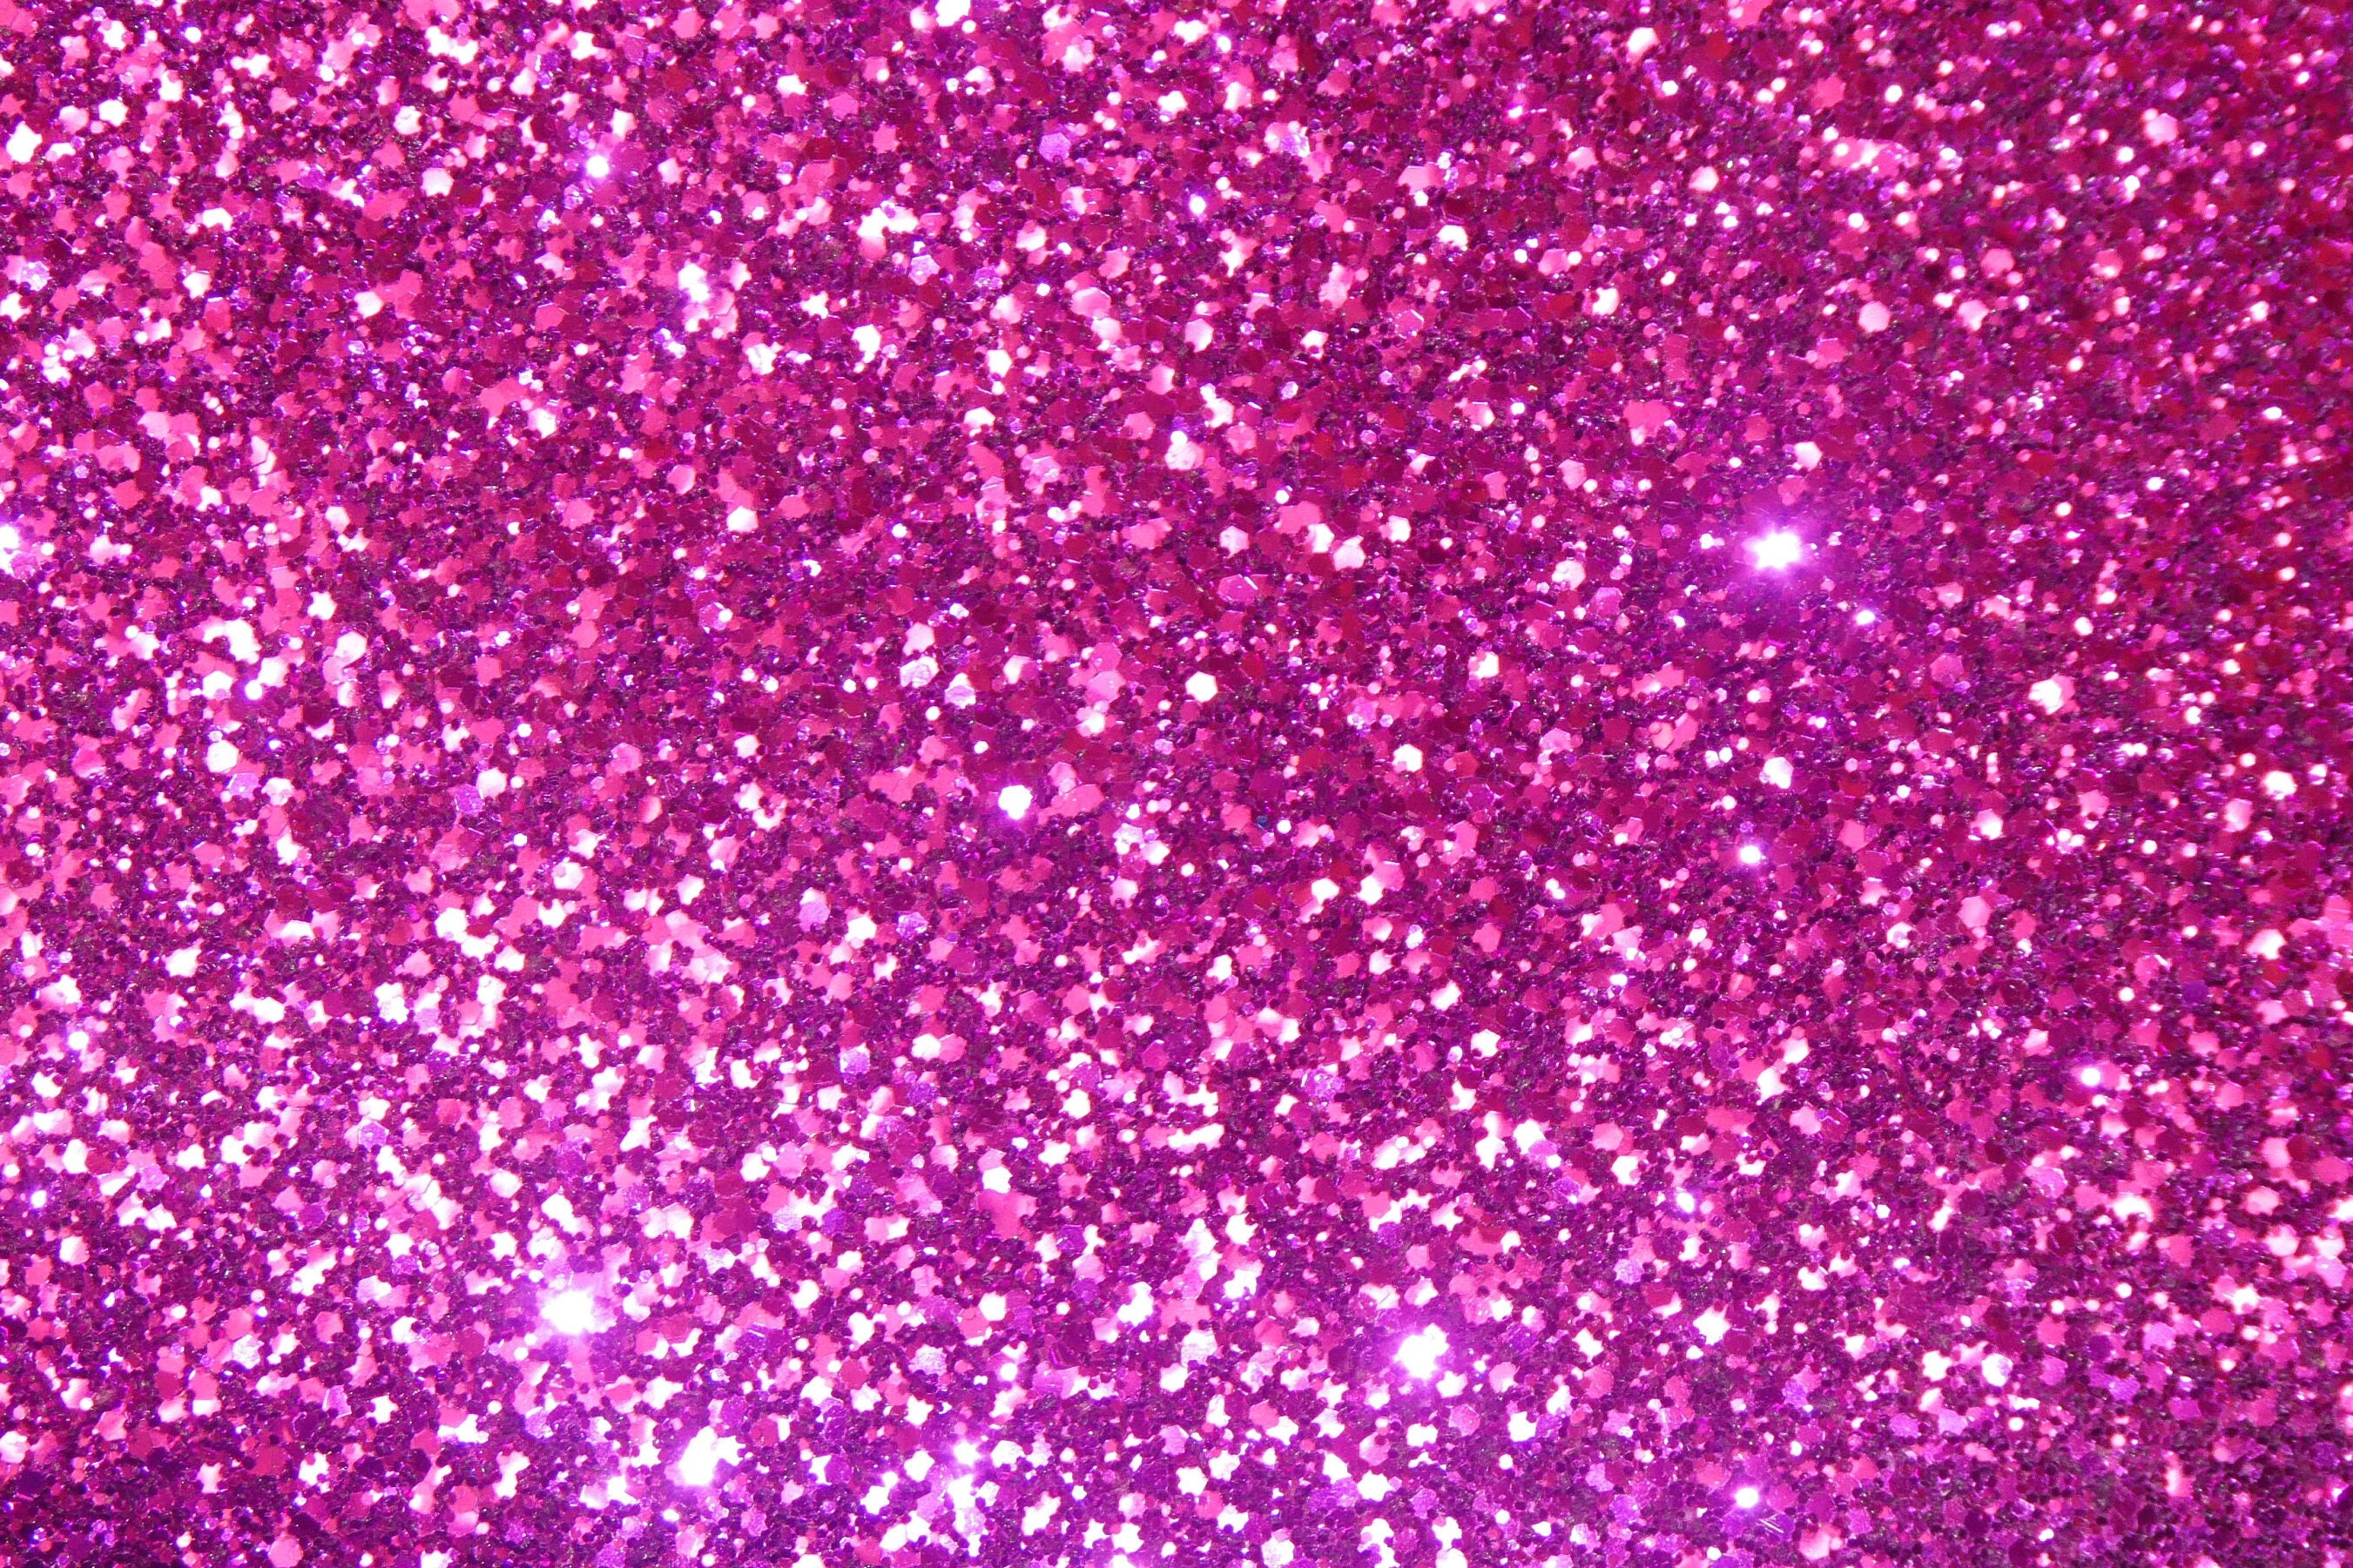 Fine GLITTER 8x10 FLAMING Neon Hot PINK with tiny black spots applied to  Leather THiCK 5.5oz/2.2 mm PeggySueAlso® E4355-41 Valentines Day